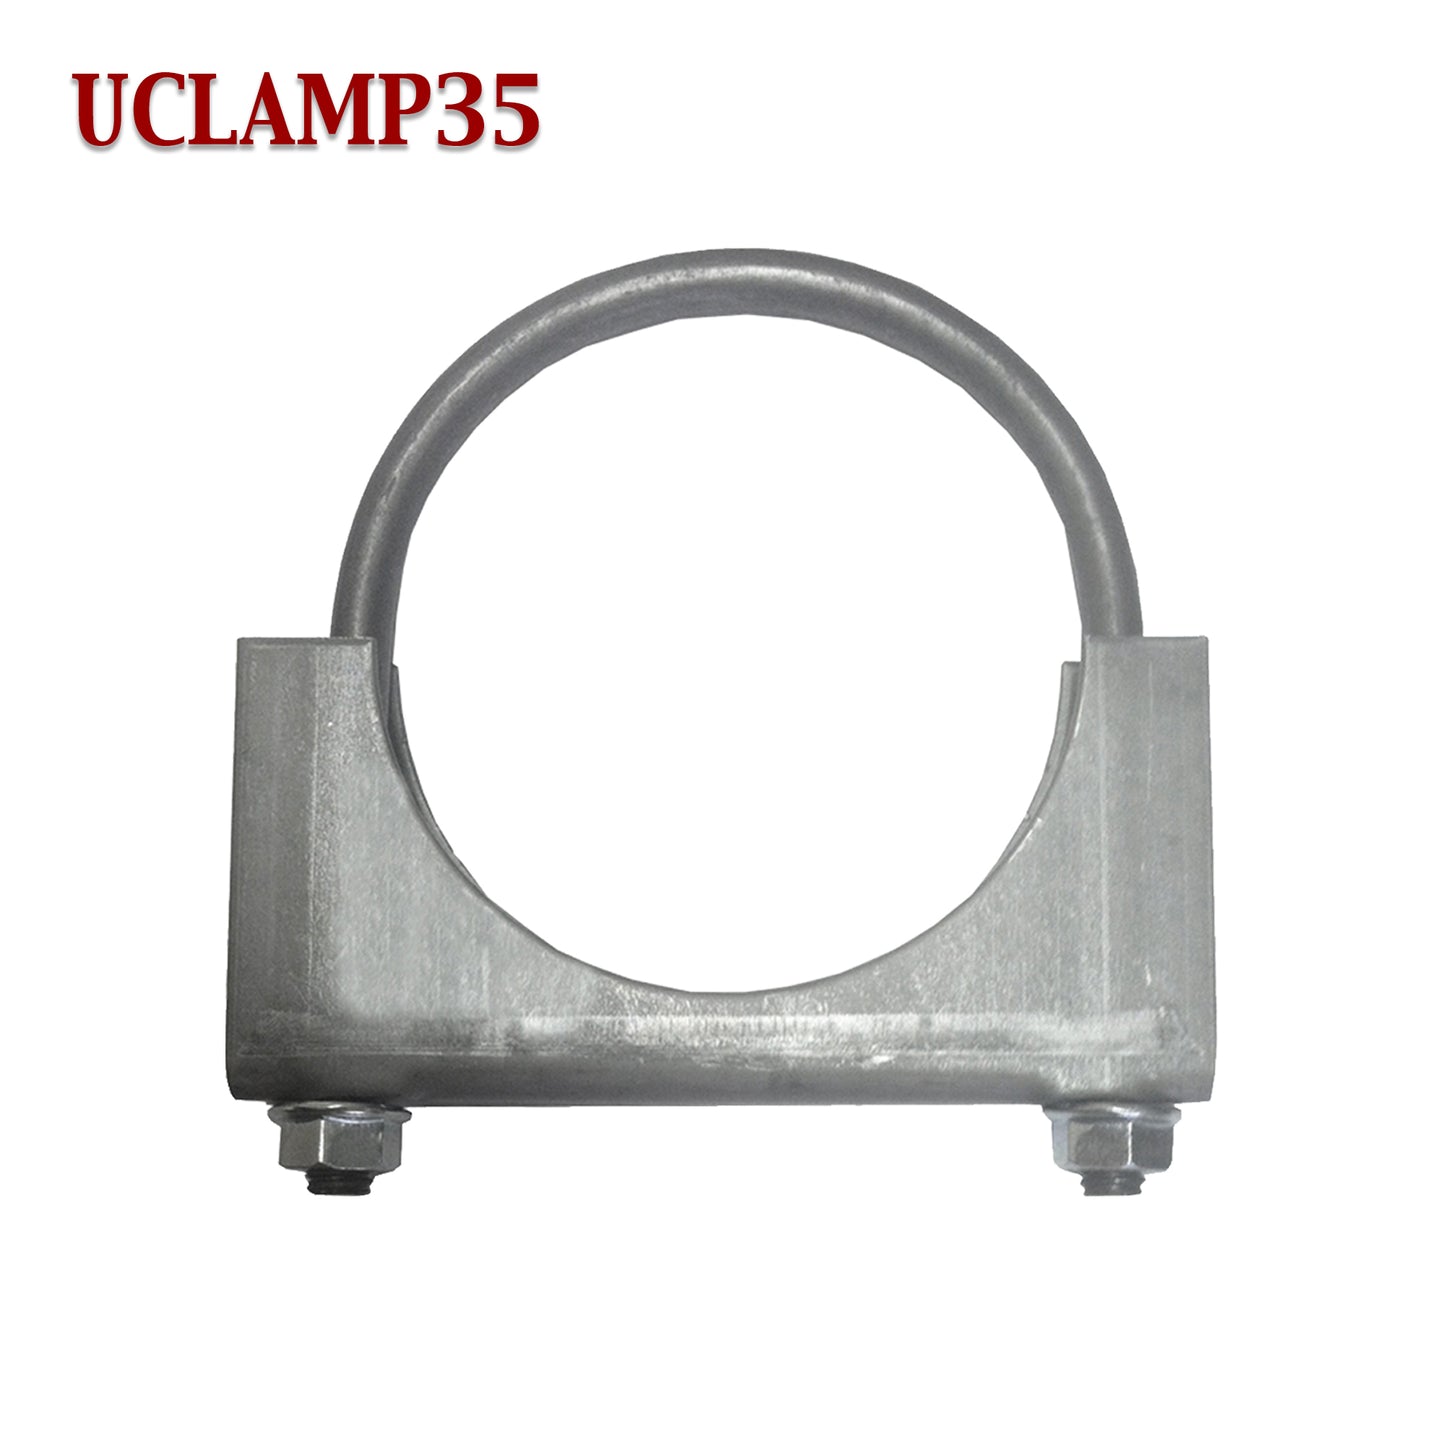 3 1/2" Exhaust Muffler Clamp U-Bolt Saddle Style For 3.5" Pipe